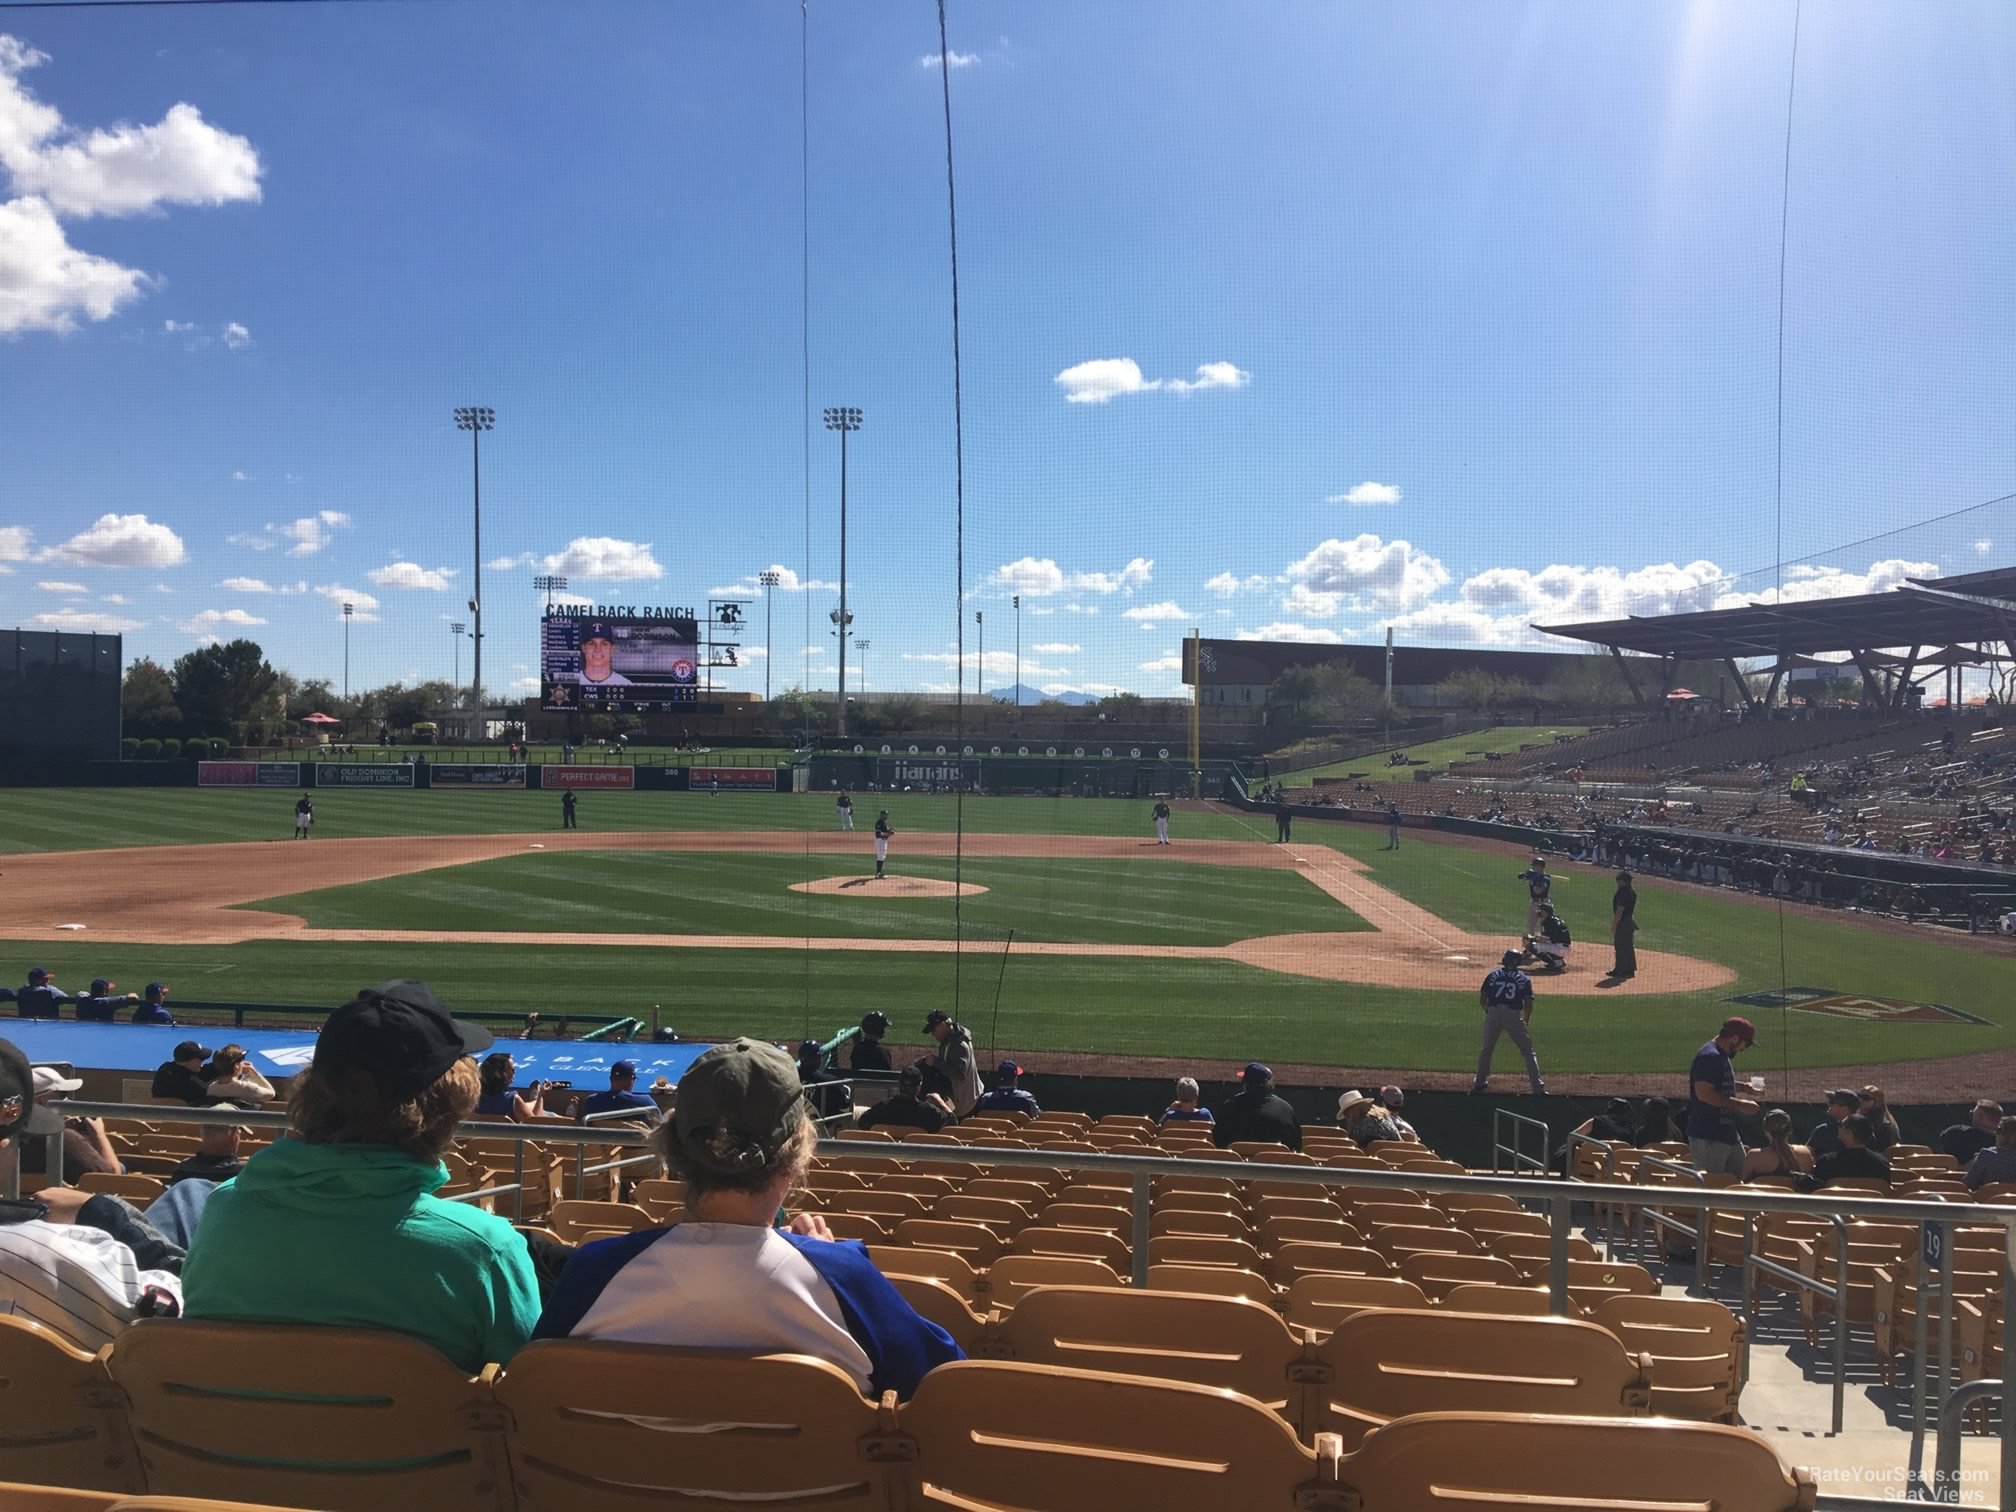 section 119, row 5 seat view  - camelback ranch